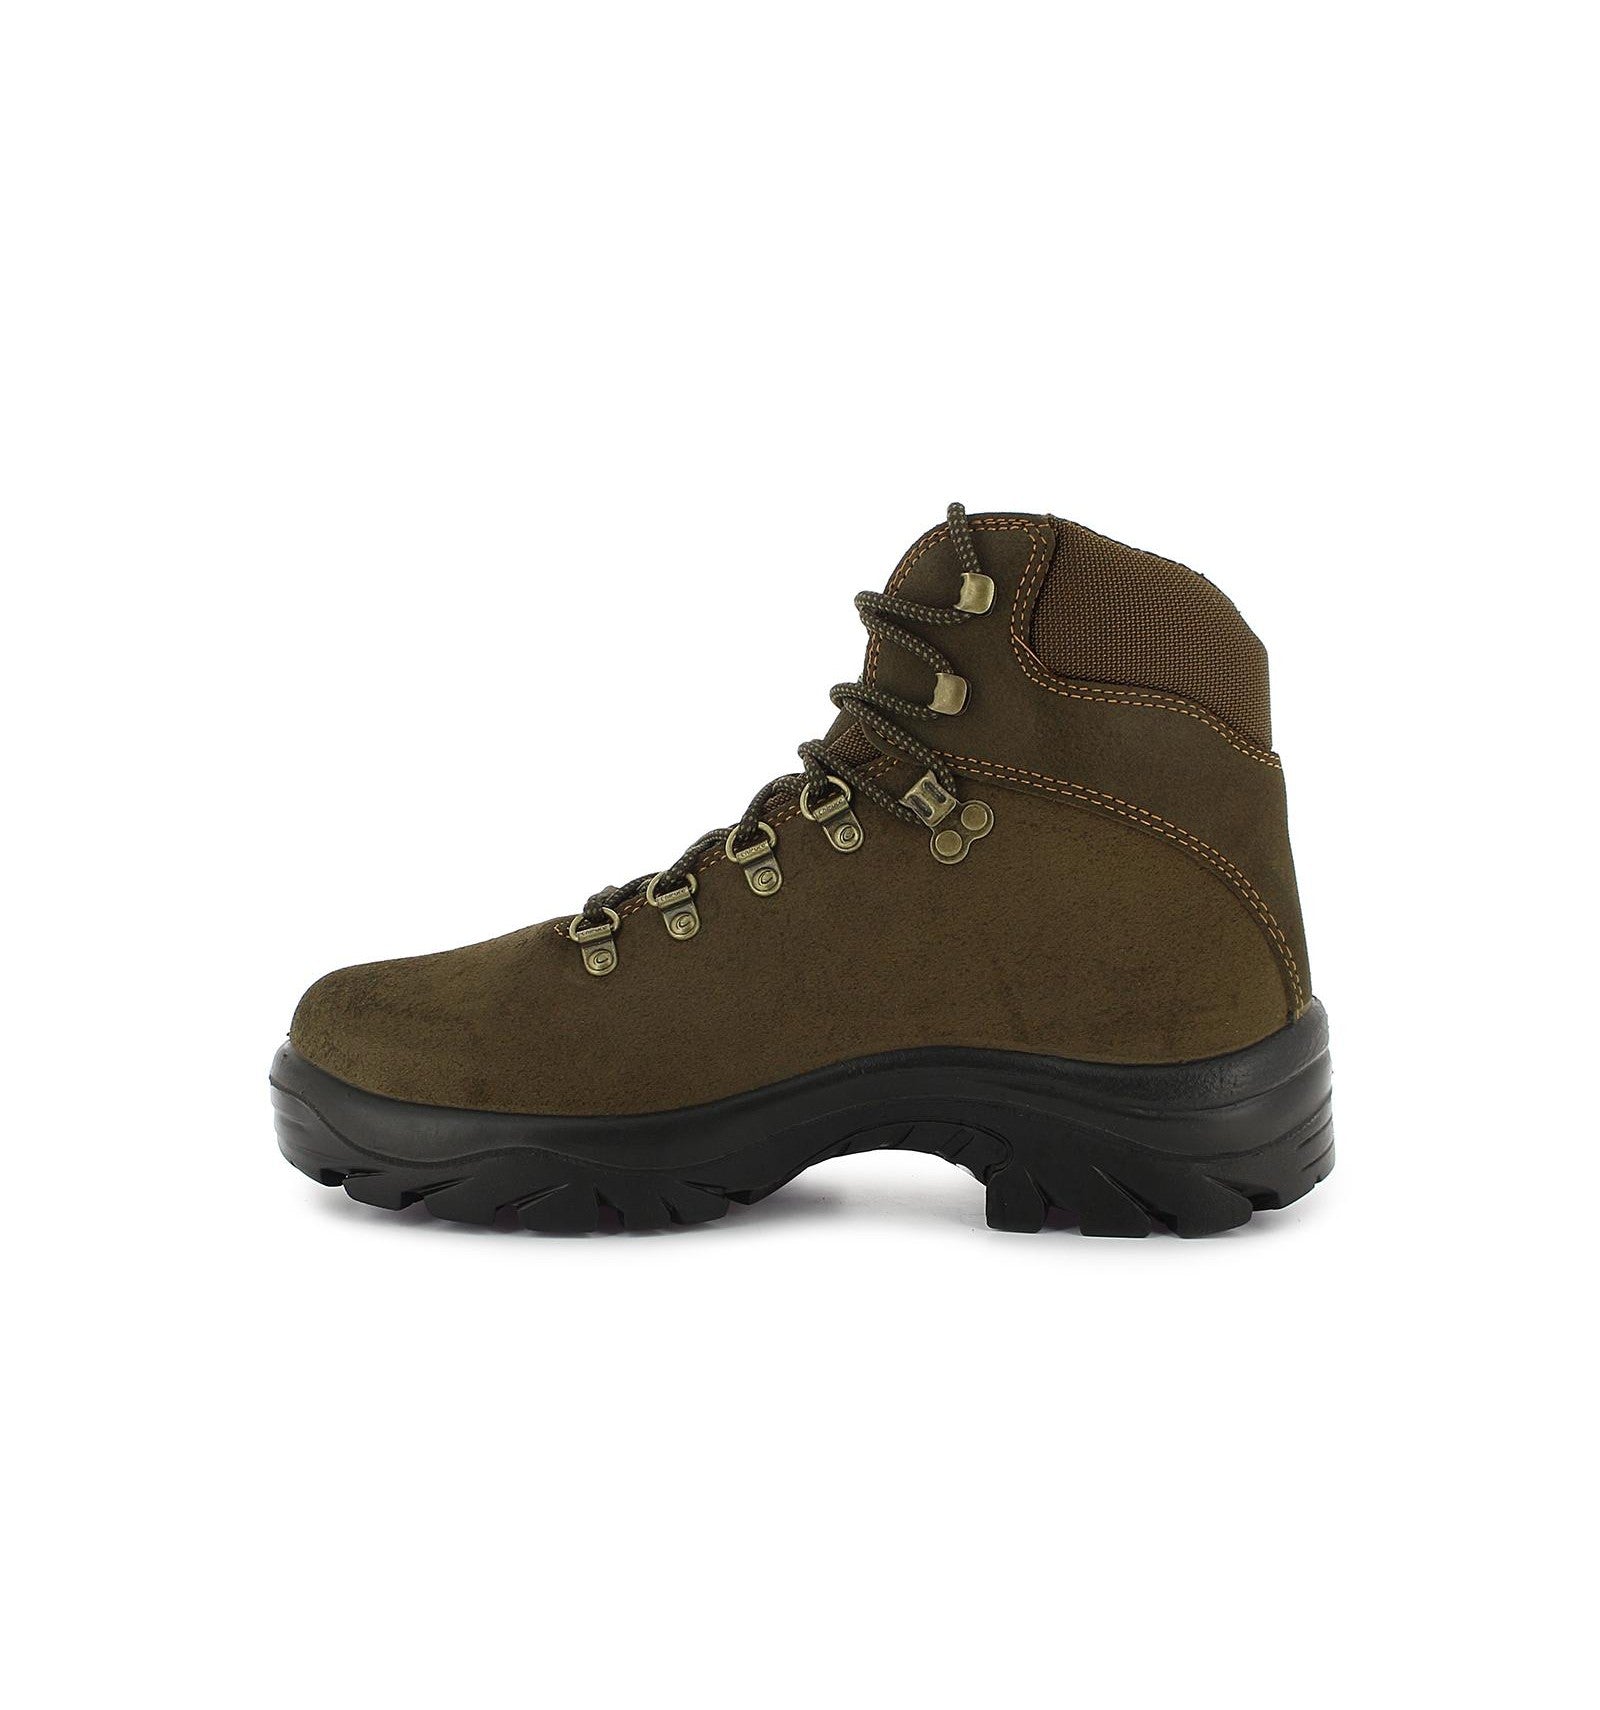 Pointer Gore-Tex Hunting Boot